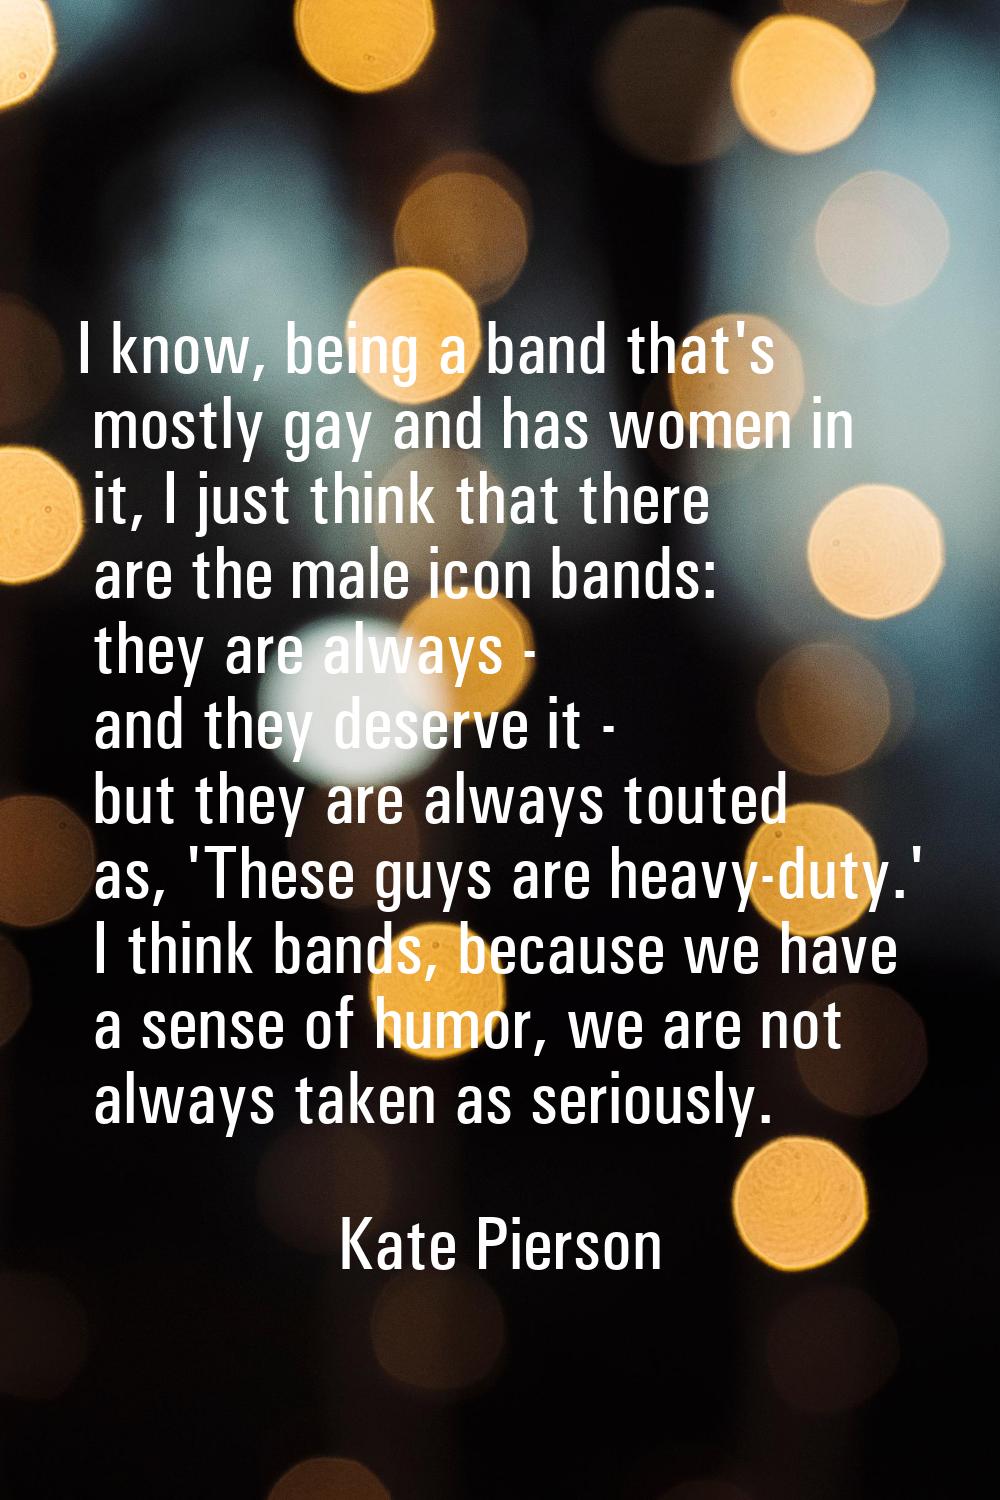 I know, being a band that's mostly gay and has women in it, I just think that there are the male ic